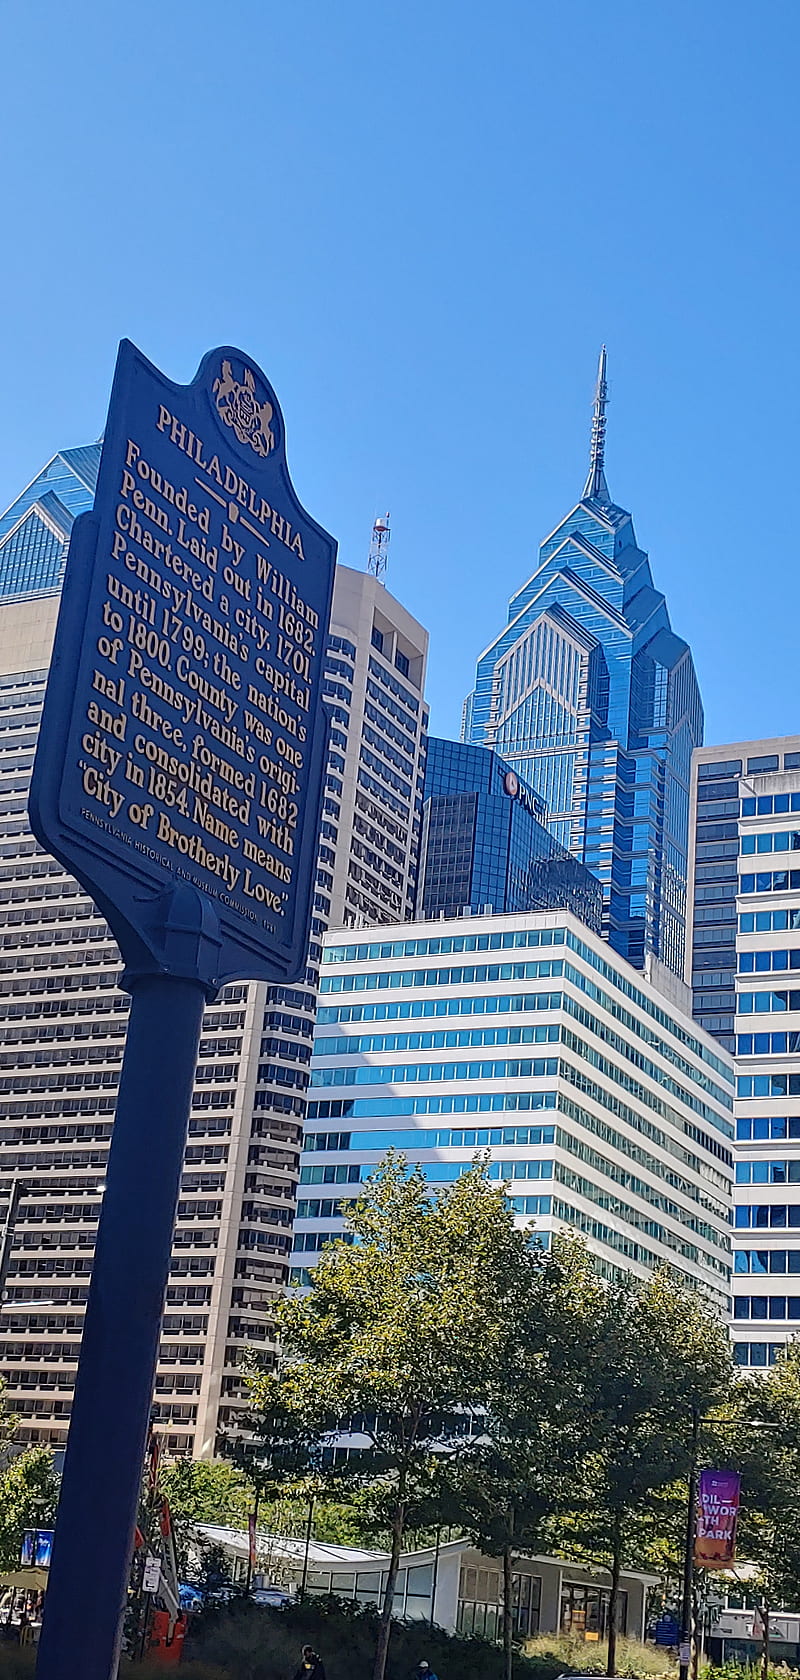 Broad Street Philly - philly post - Imgur